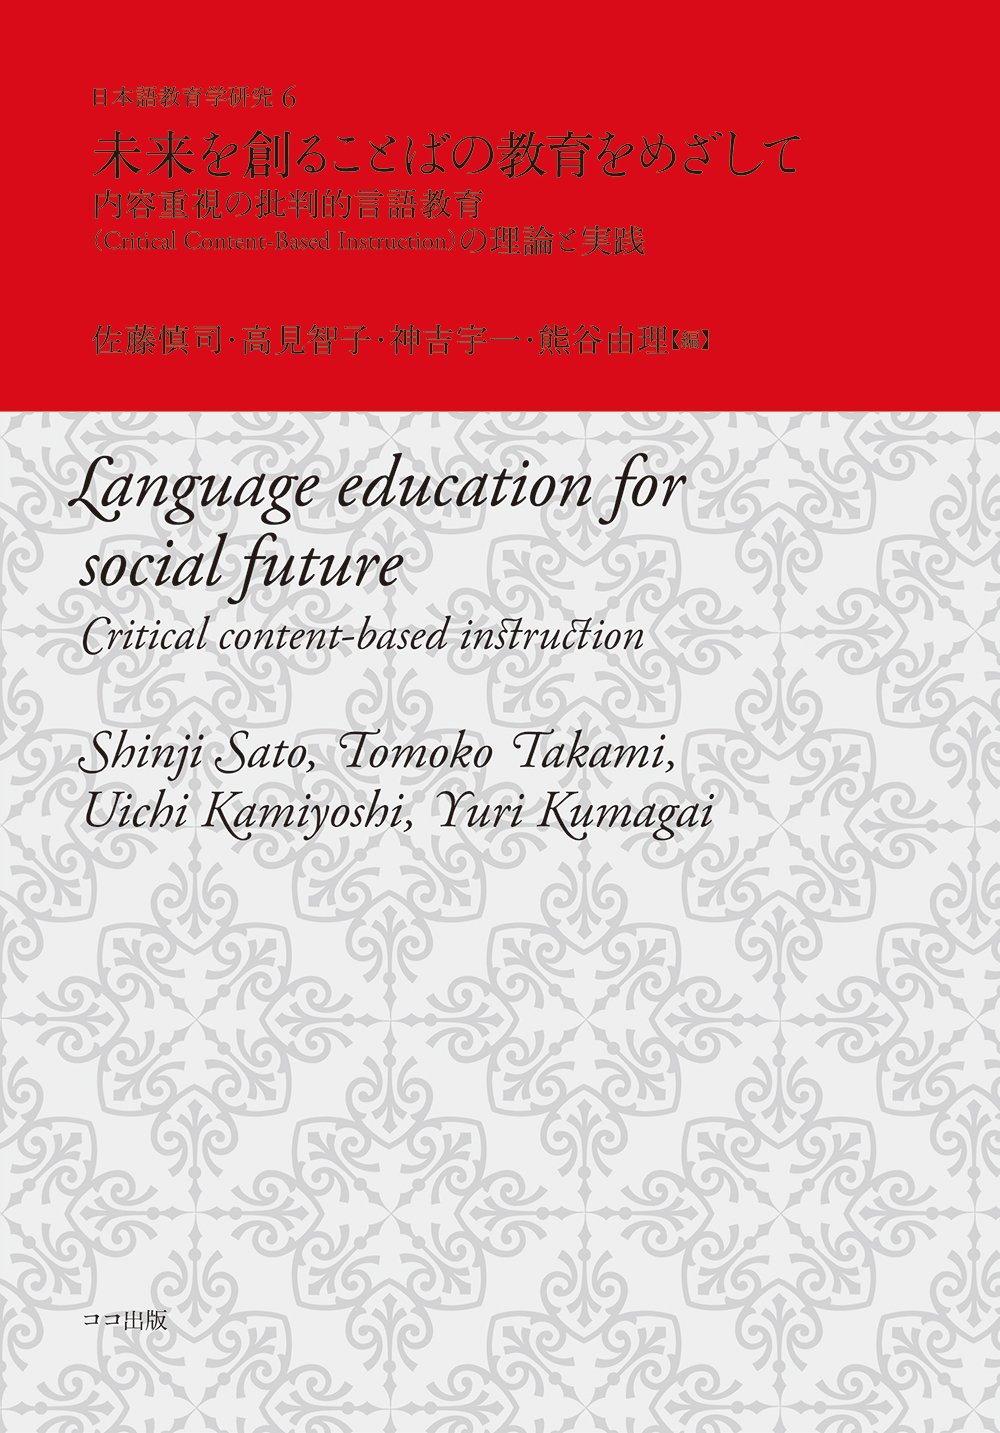 Photo Of Book Cover For The Book Entitled Language Education For Social Future: Critical Content-Based Instructions